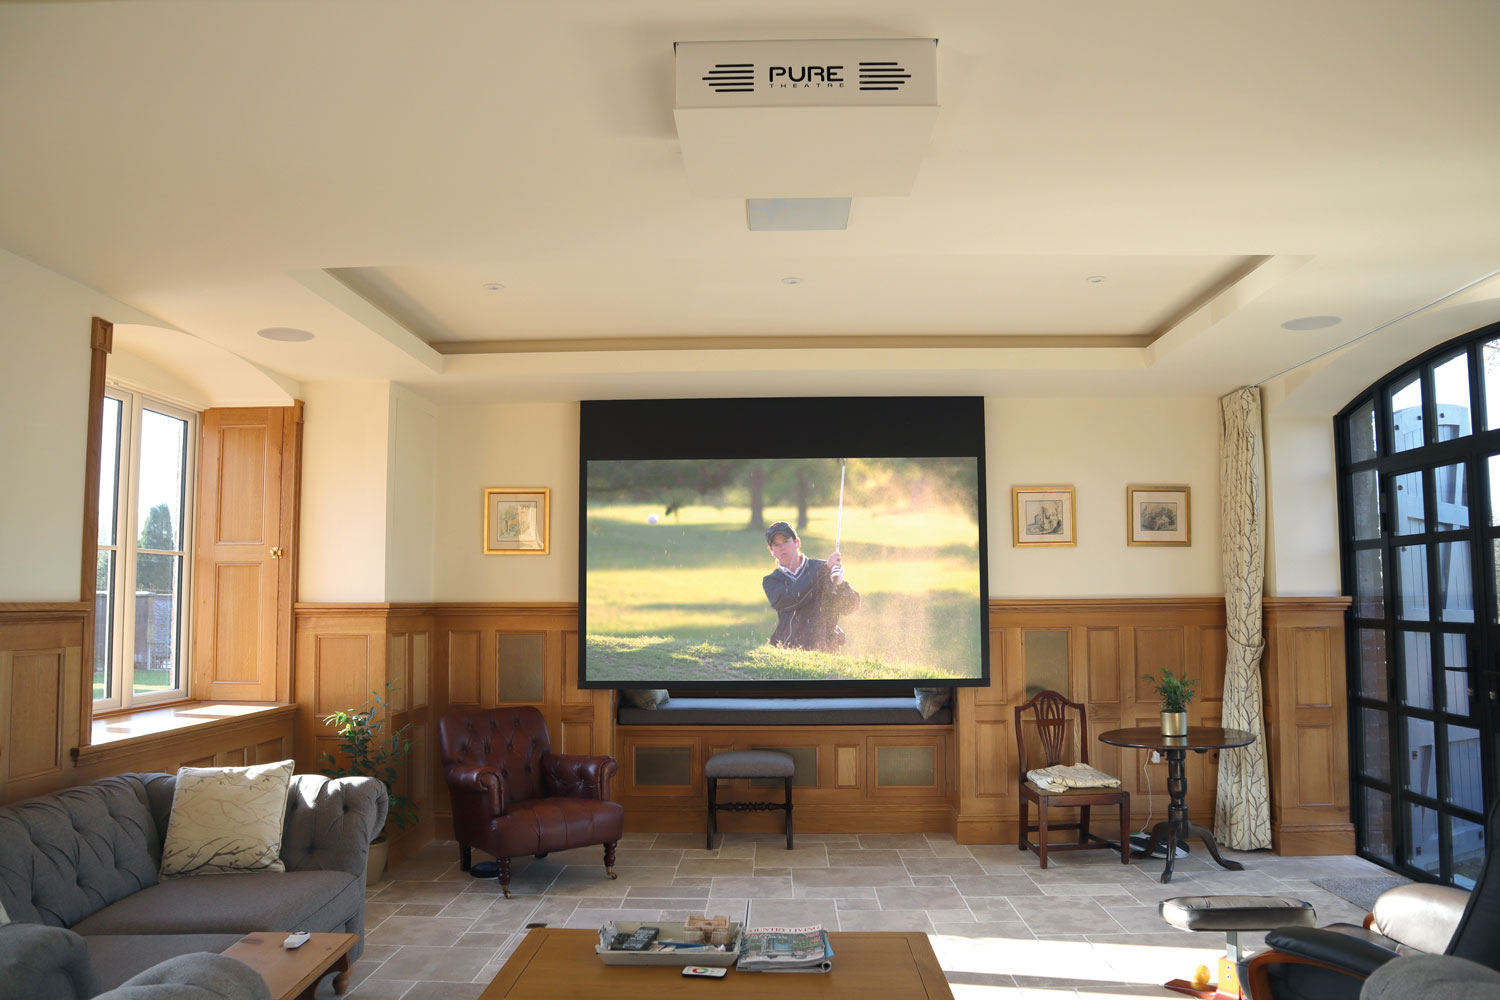 Home Cinema Room in period property